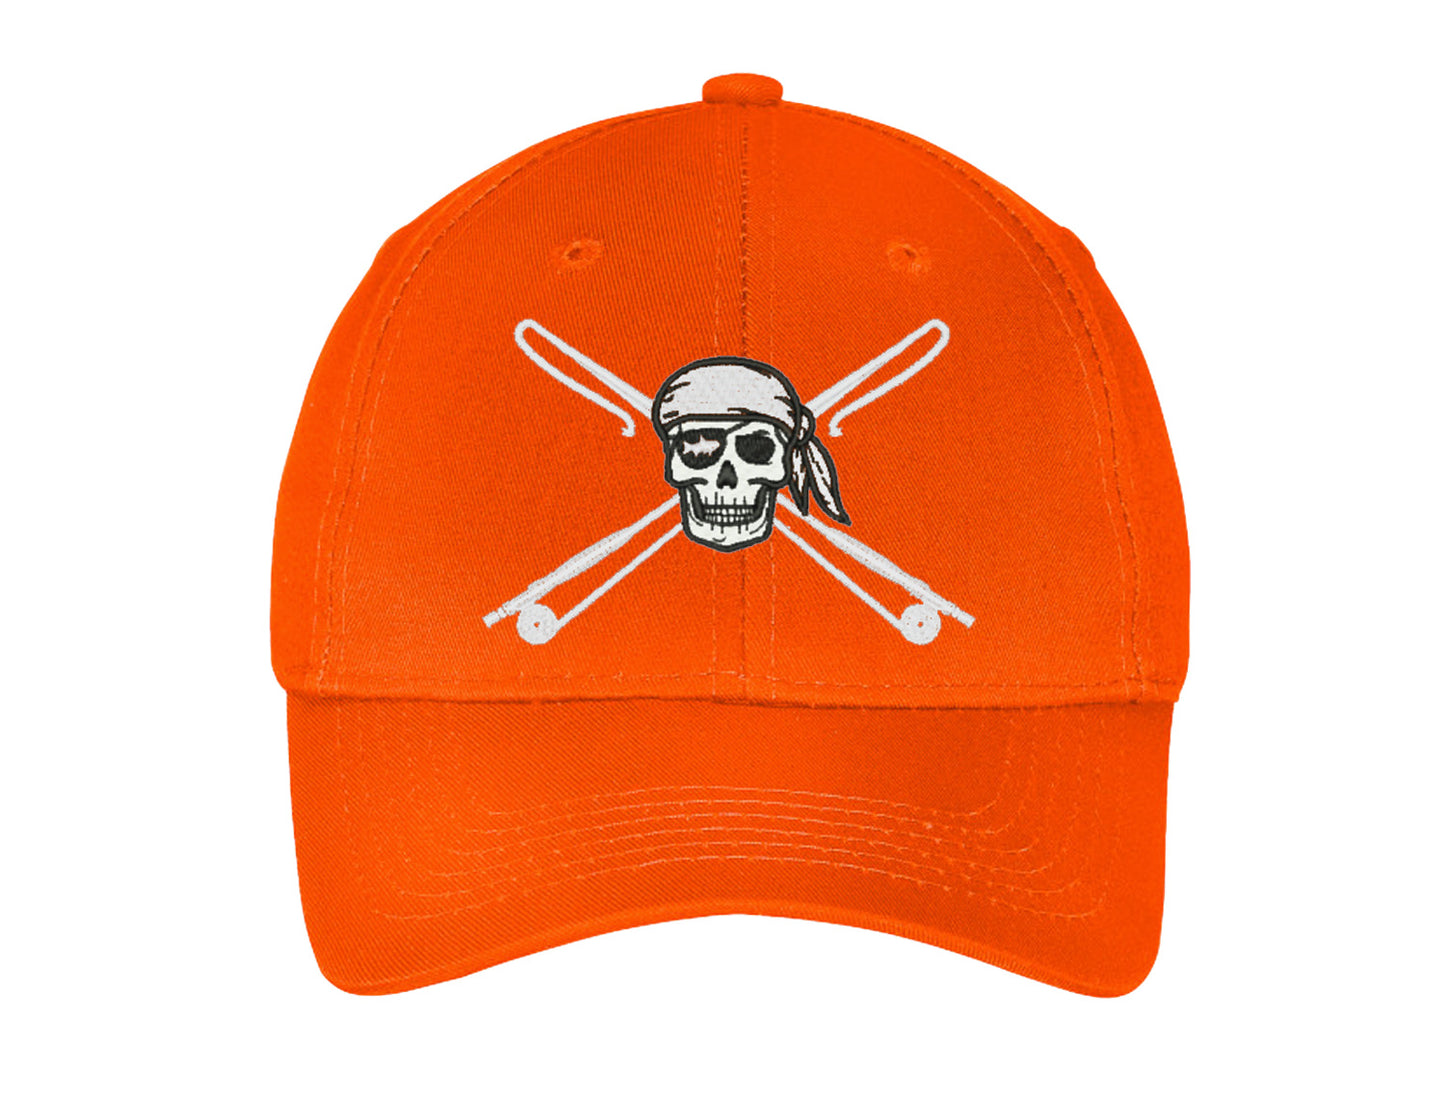 Youth Fishing Hats with Reel Fishy Pirate Skull & Rods Logo - Orange